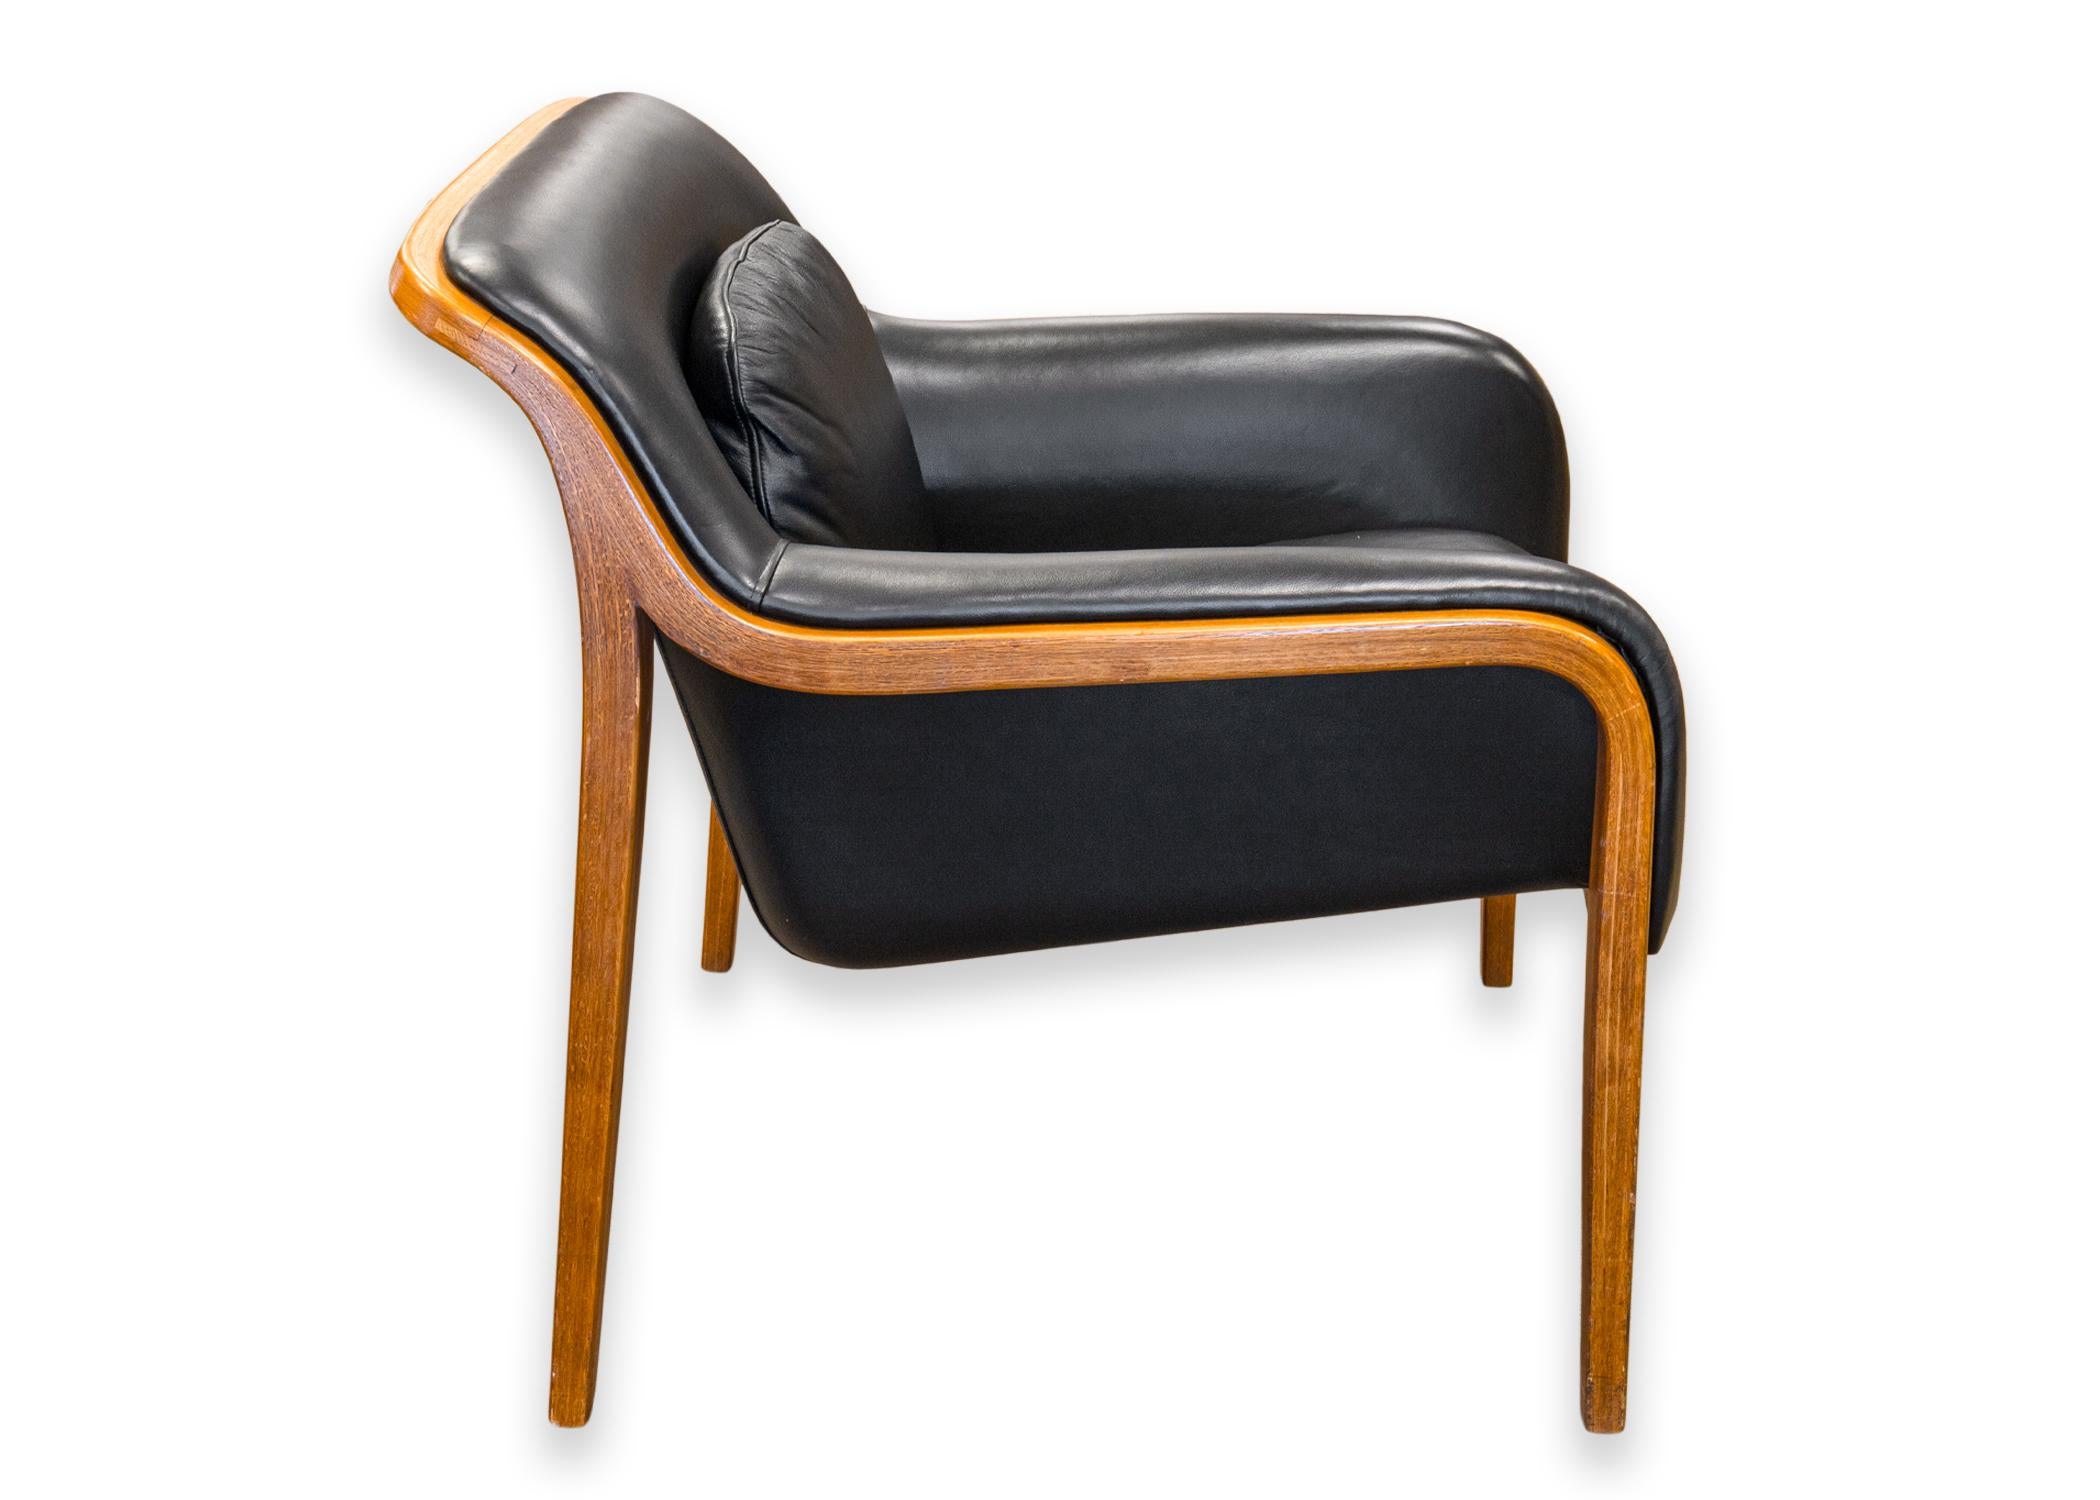 A set of Bill Stephens for Knoll accent armchairs. A gorgeous mid century modern set of accent armchairs with a wooden frame, and a rich black leather upholstery. These chairs feature four rectangular wooden legs that bend and curve into the frame